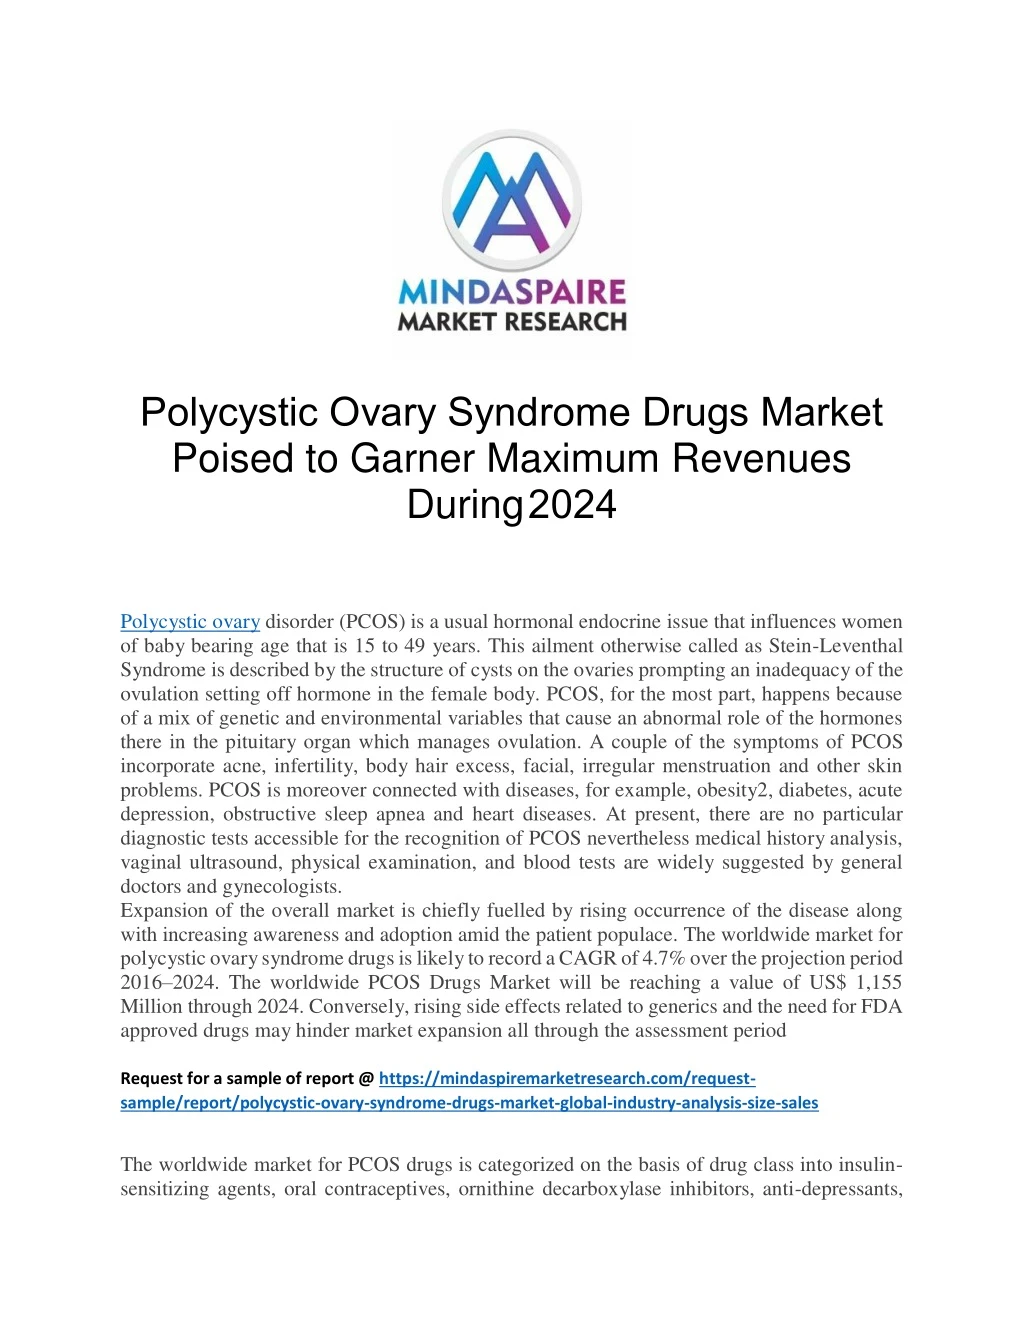 polycystic ovary syndrome drugs market poised